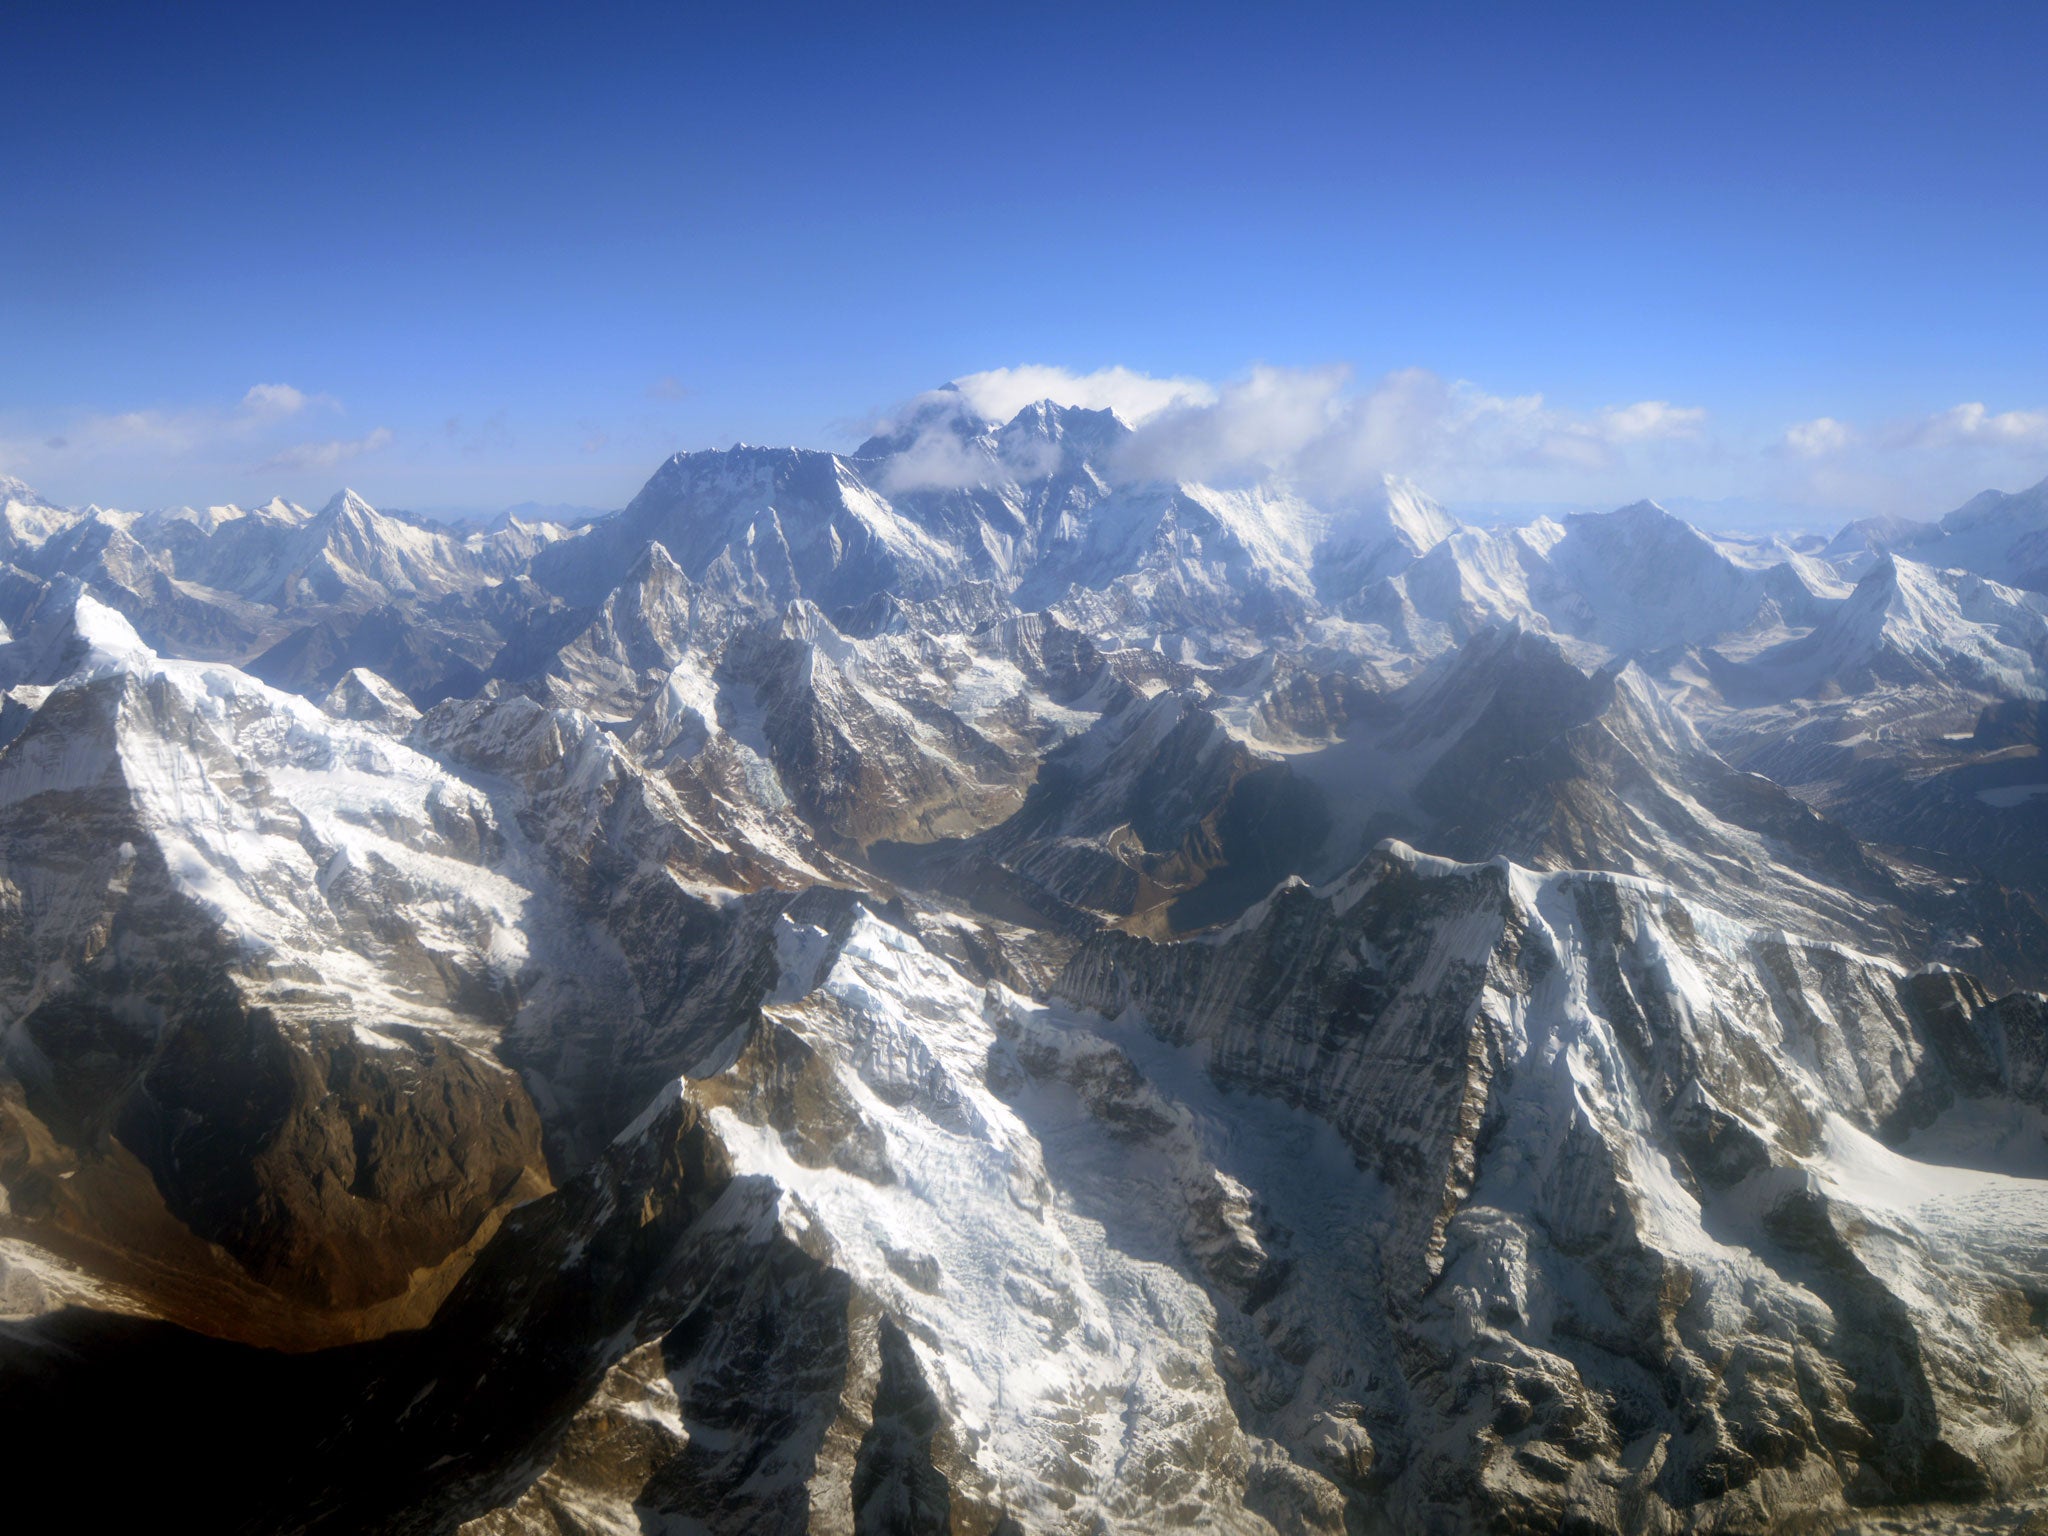 A view of Mount Everest, where the Nepalese Government is to bring in tighter controls for climbers.